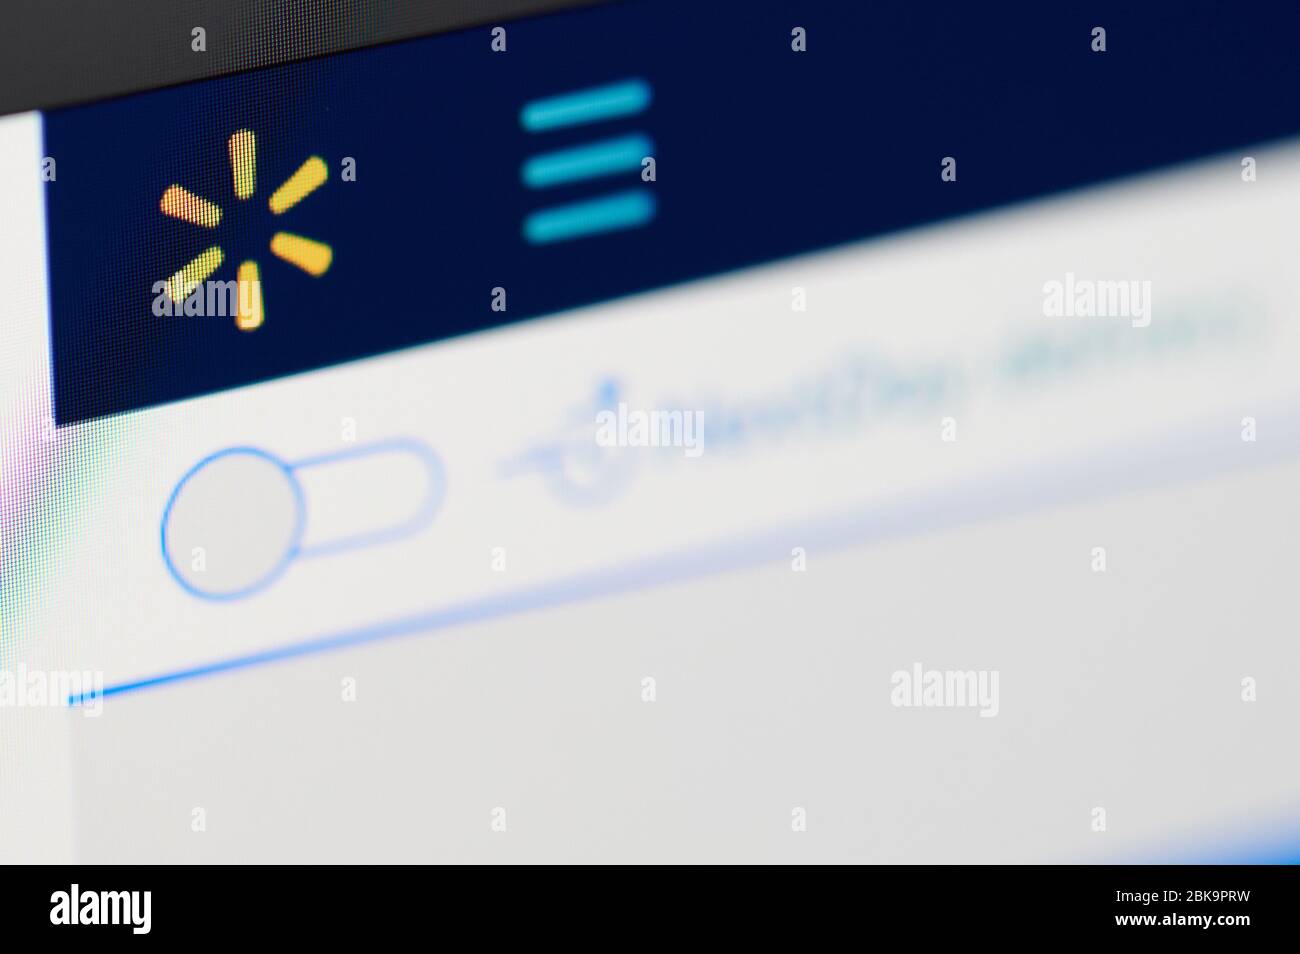 New-York , USA - April 29 , 2020:Walmart home web page close up view on laptop screen Stock Photo